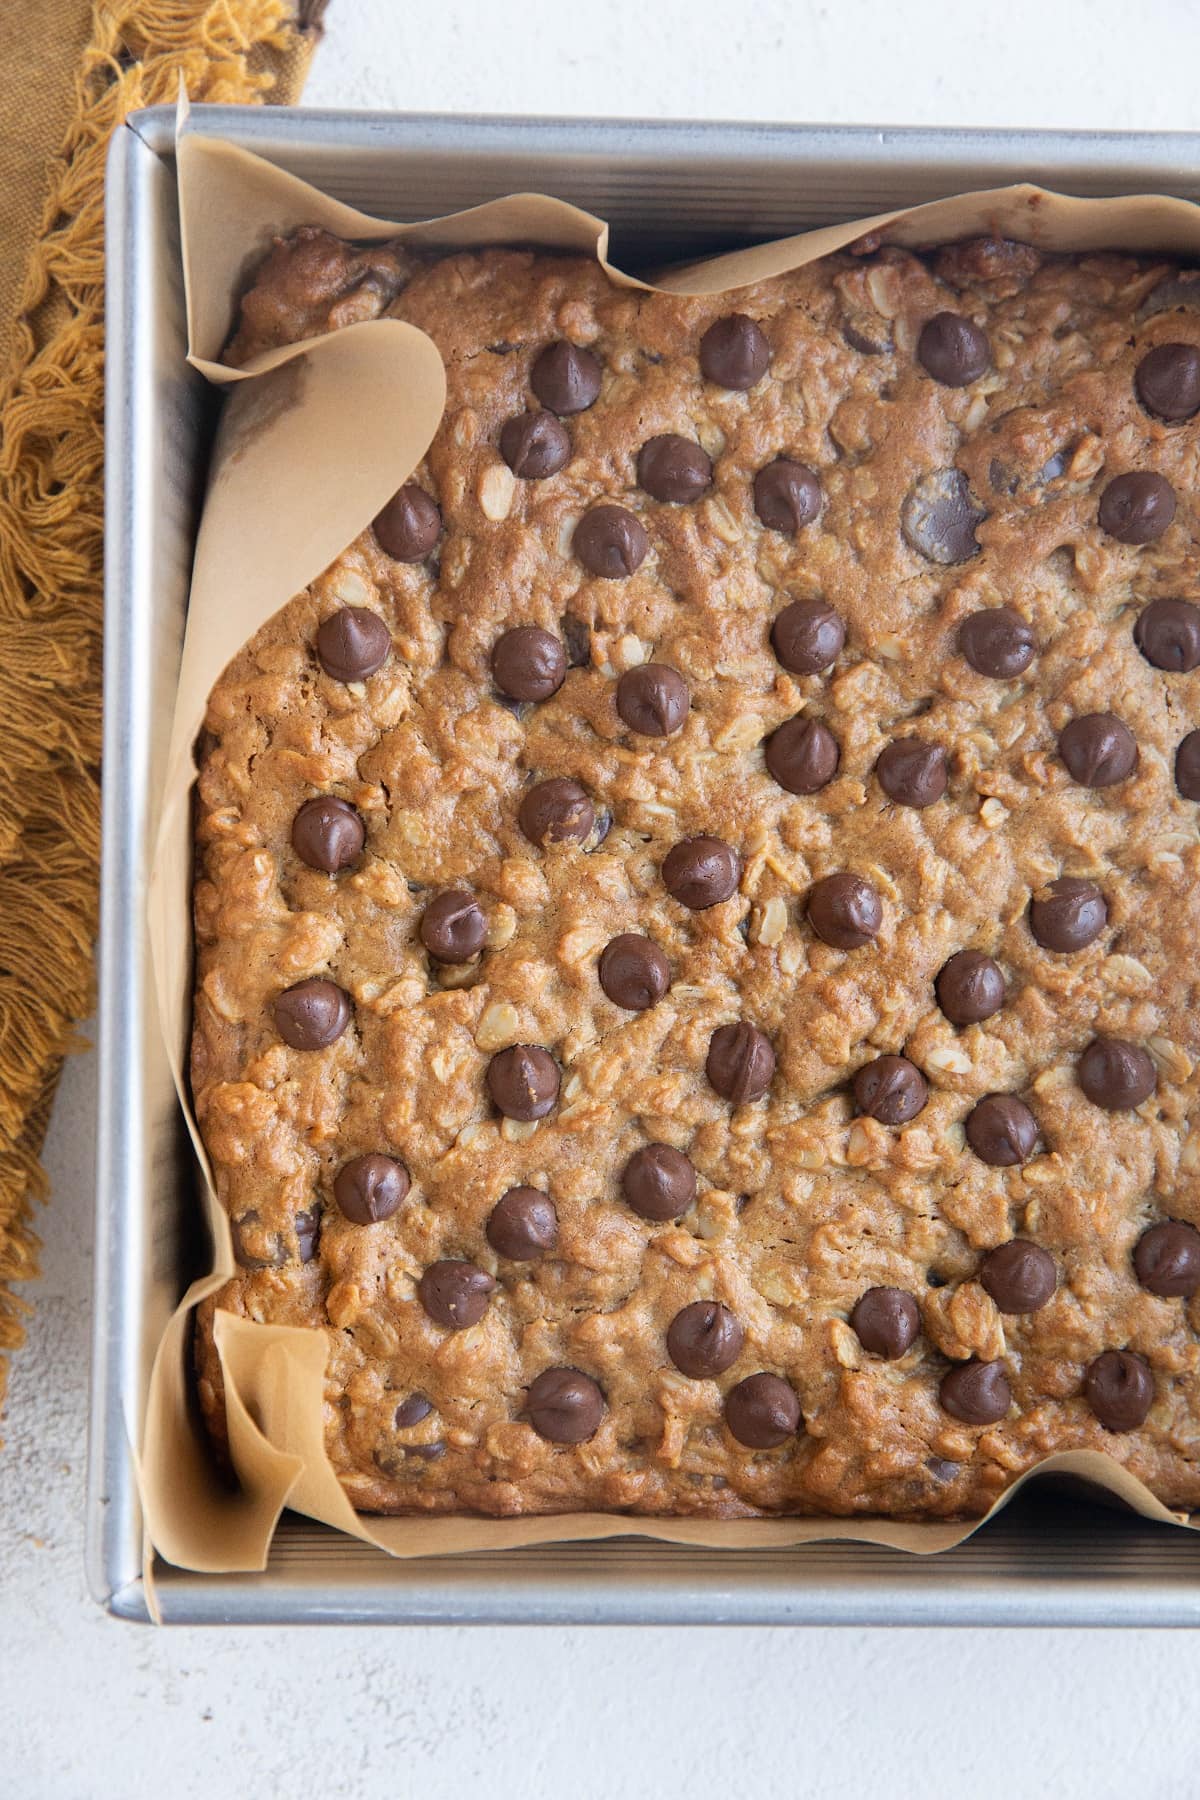 Peanut Butter Oatmeal Chocolate Chip Cookie Bars in a baking dish, fresh out of the oven.